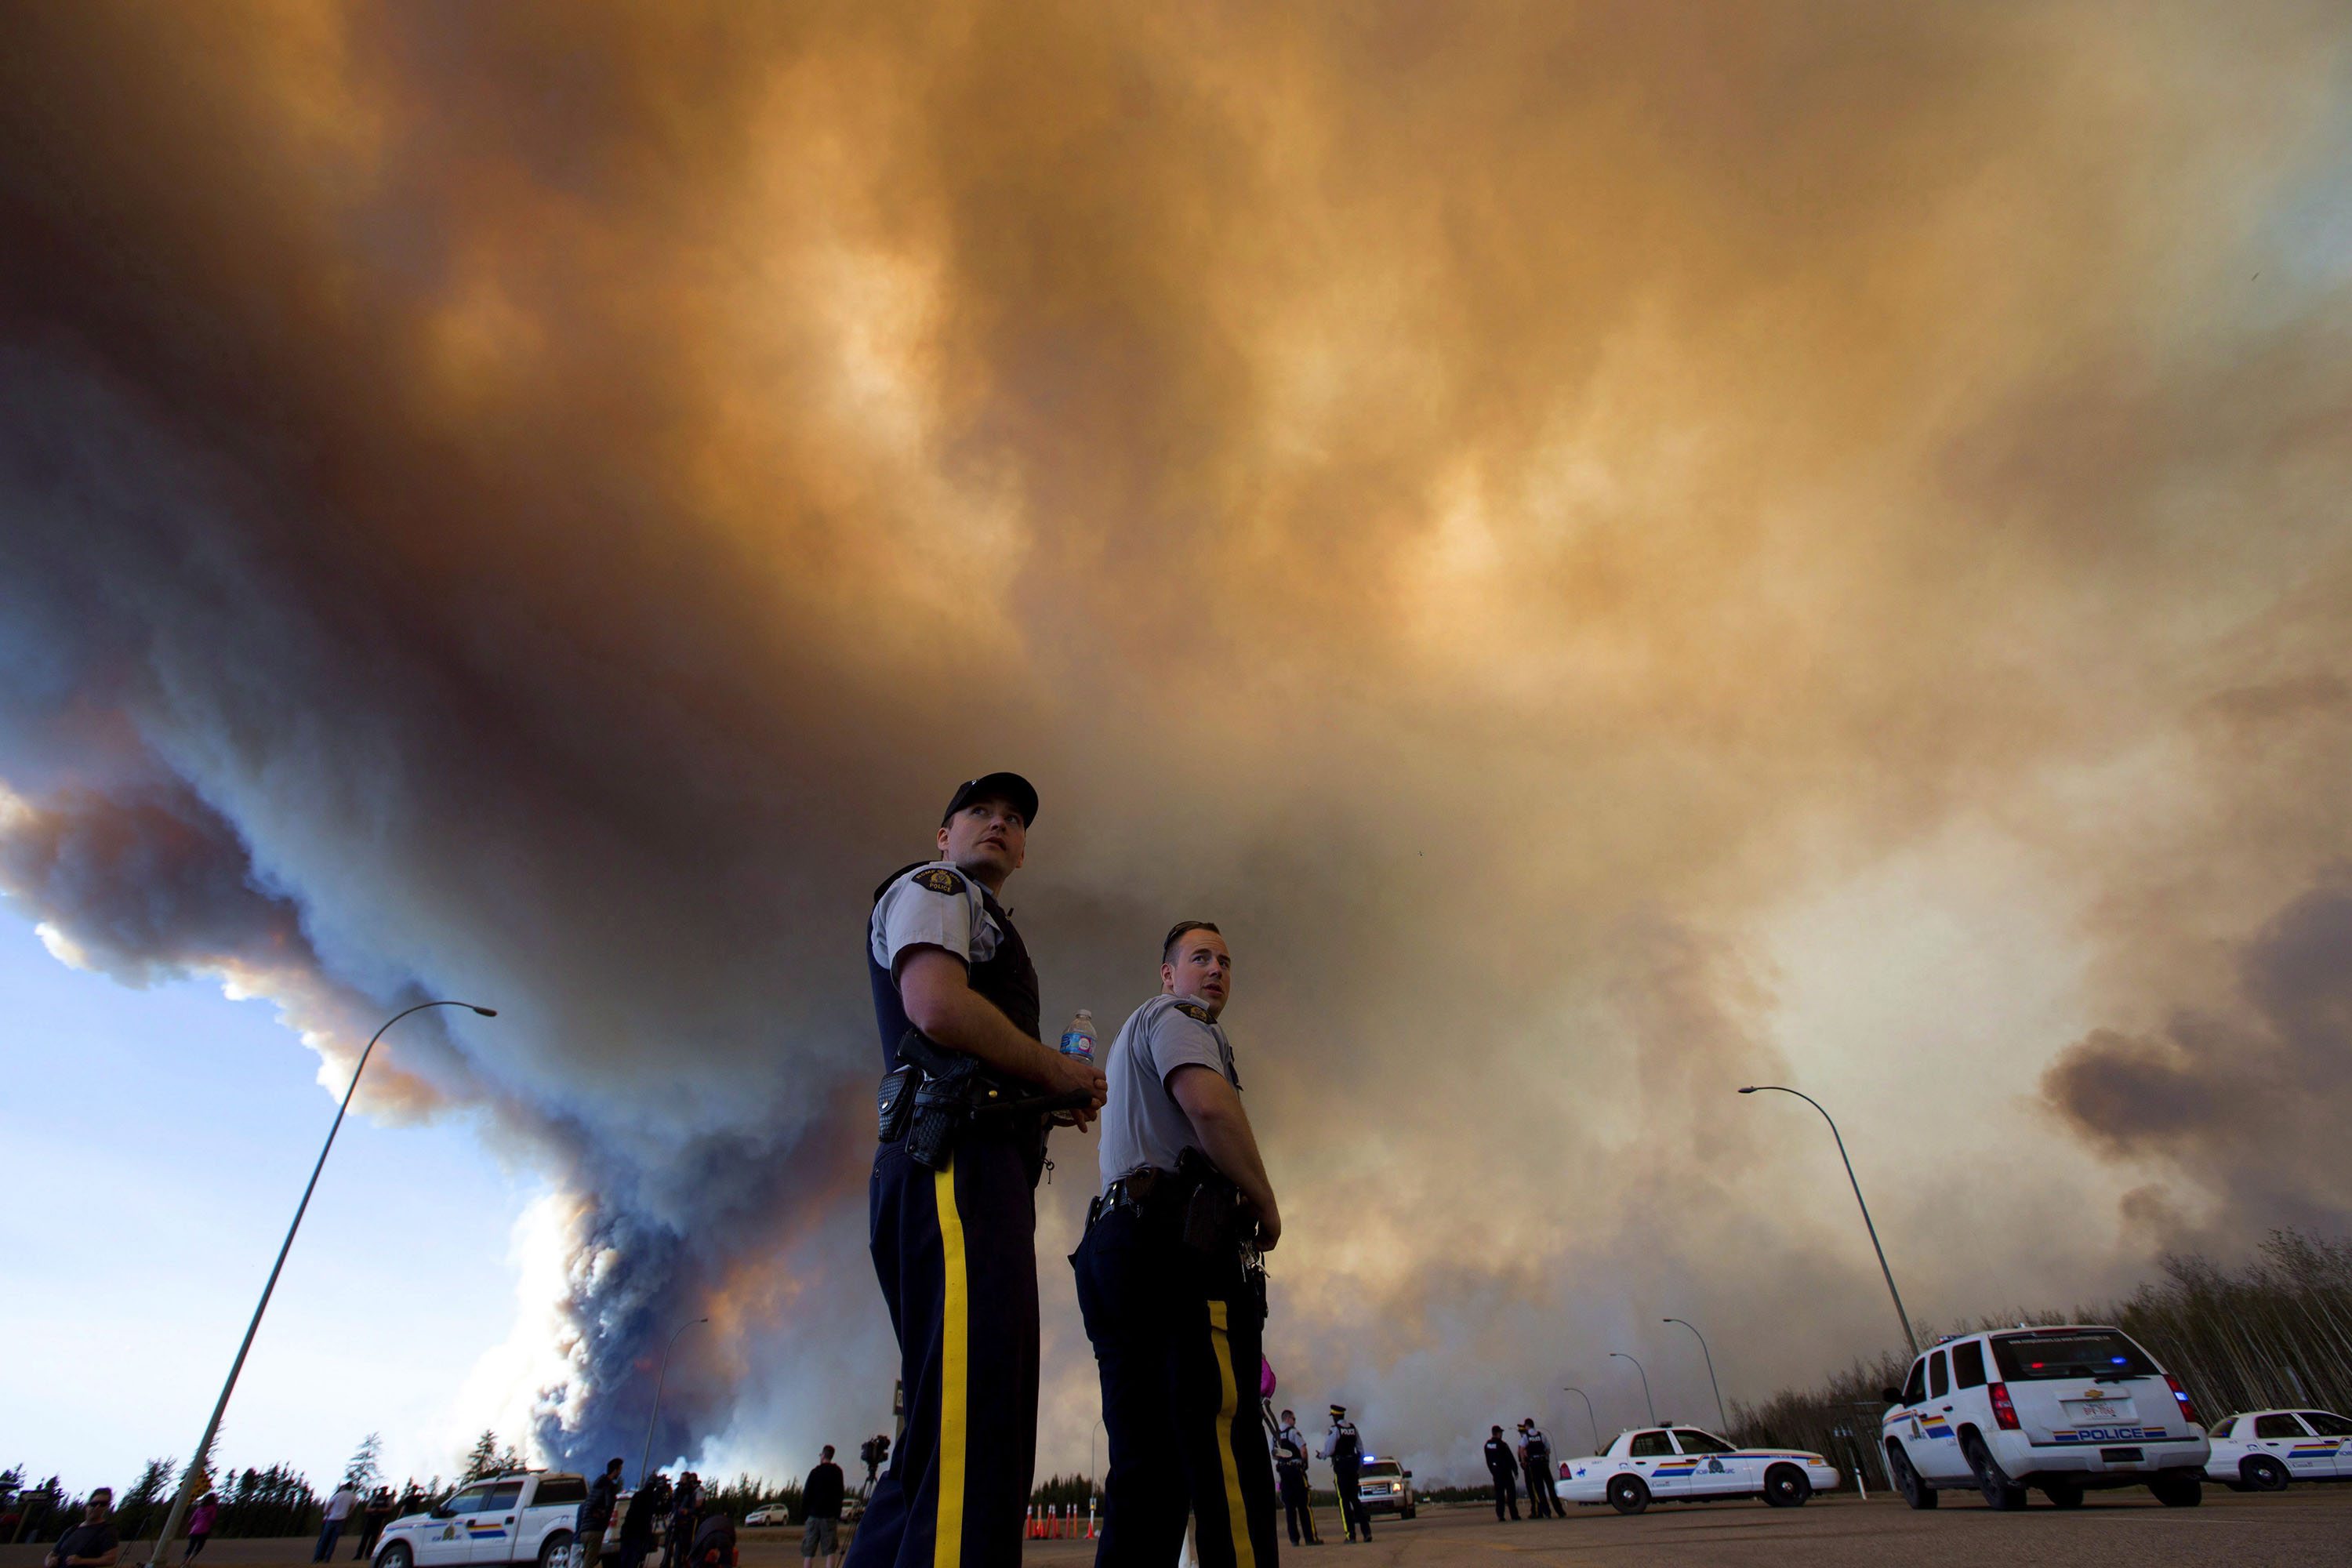 Police officers direct traffic under a cloud of smoke from a wildfire in Fort McMurray, Alberta.